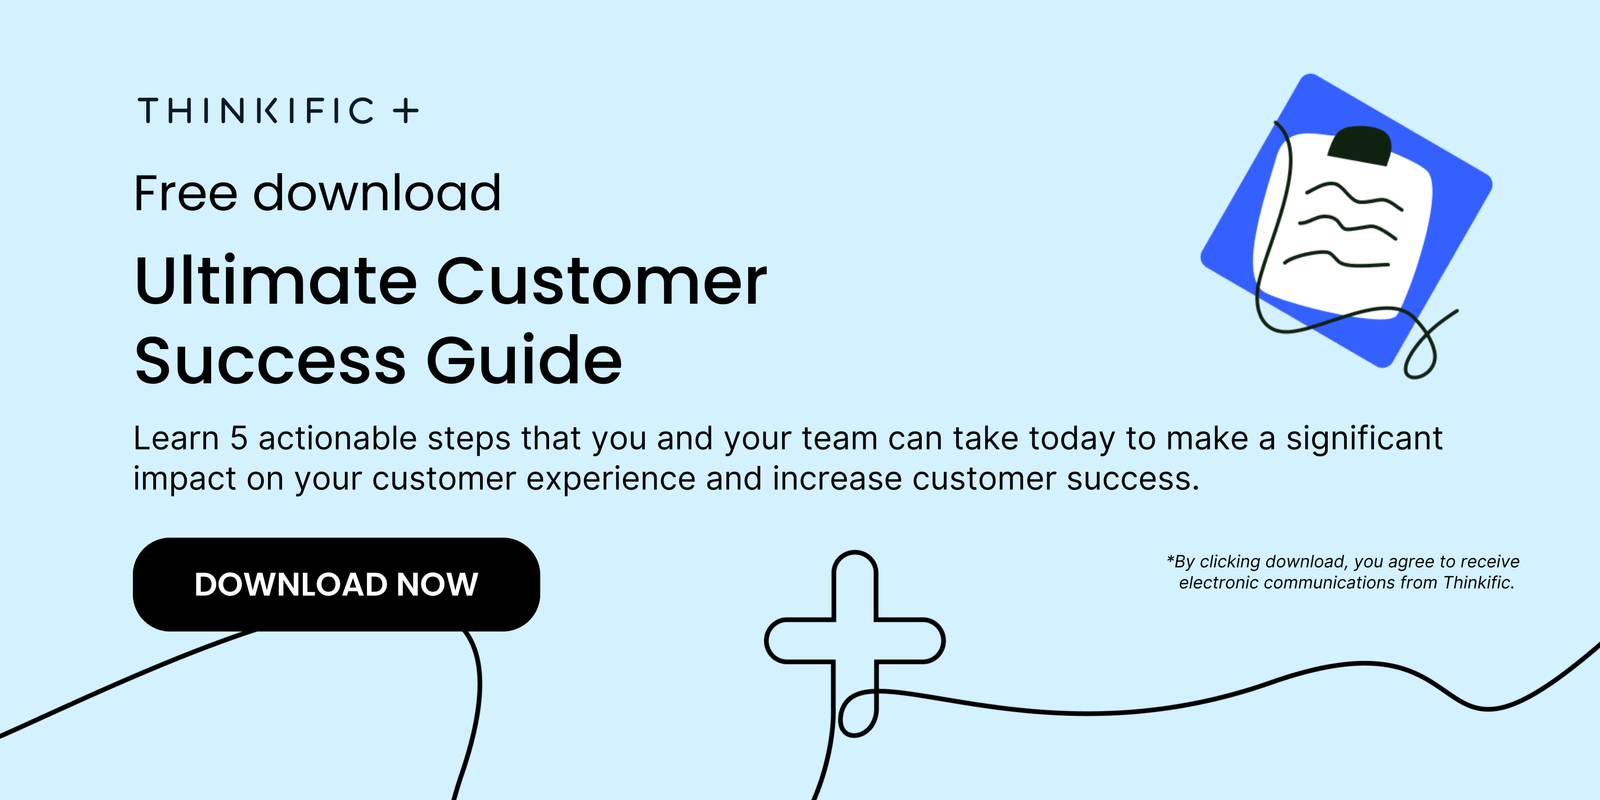 Download your free Ultimate Customer Success Guide: Download Now